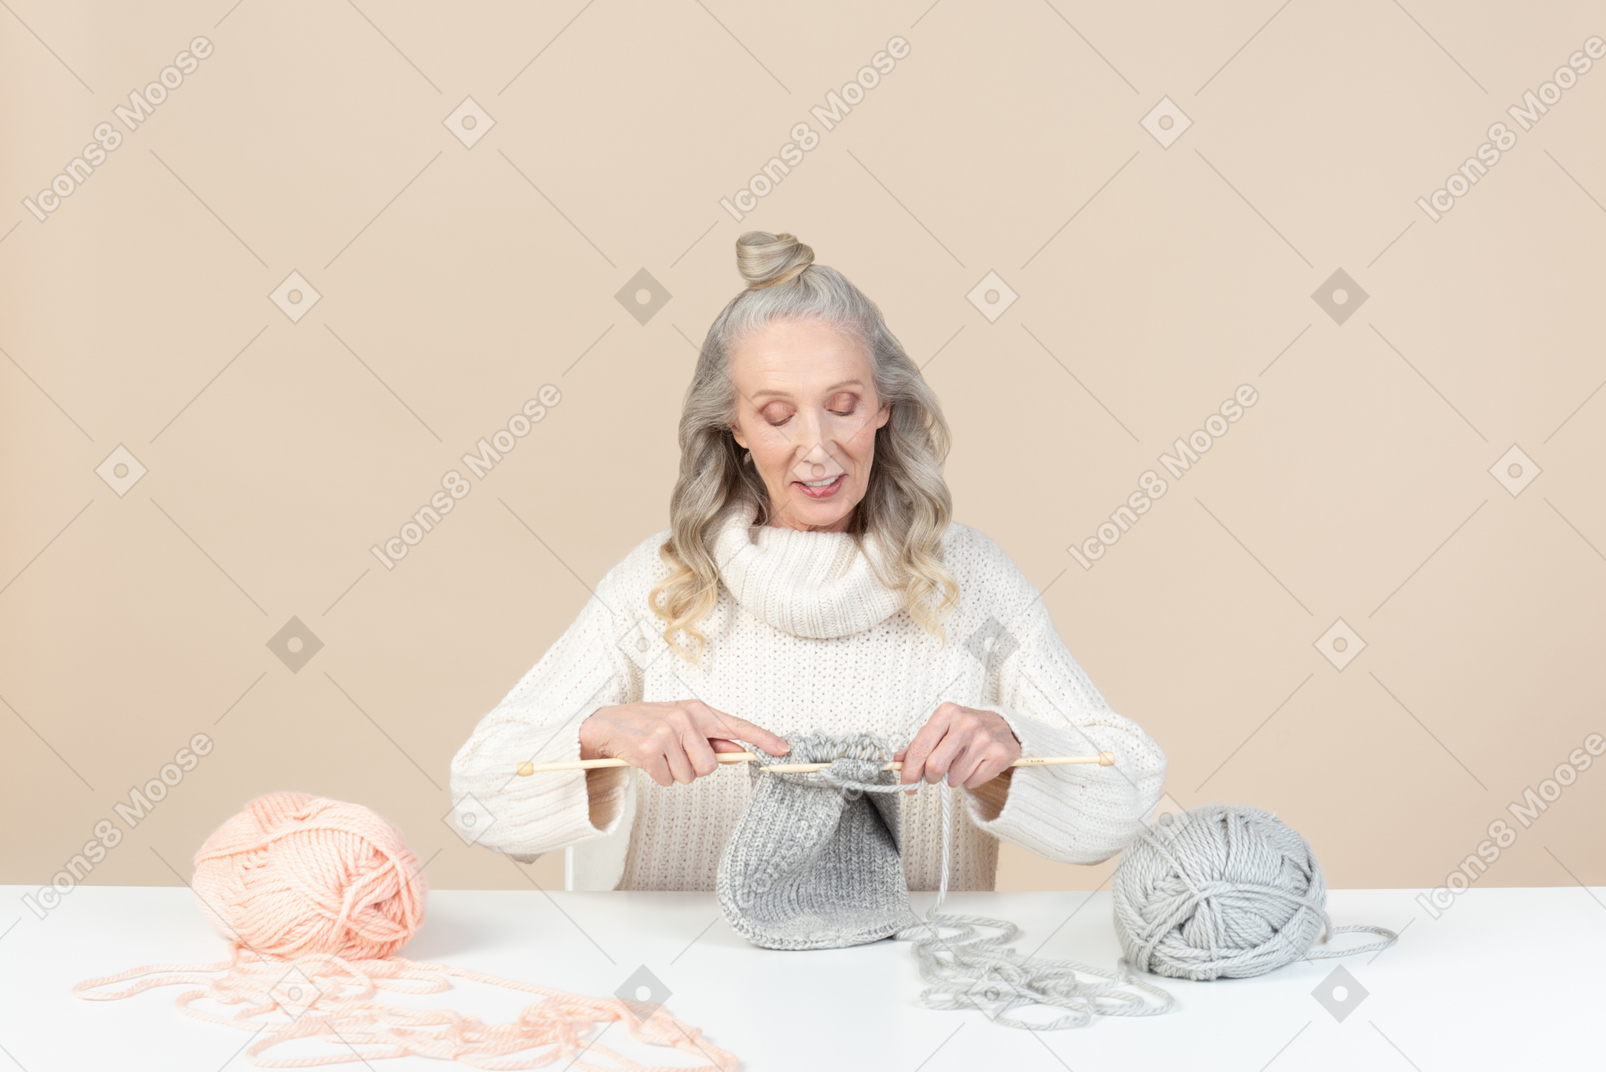 Guess, it's gonna be great knitted piece of clothes